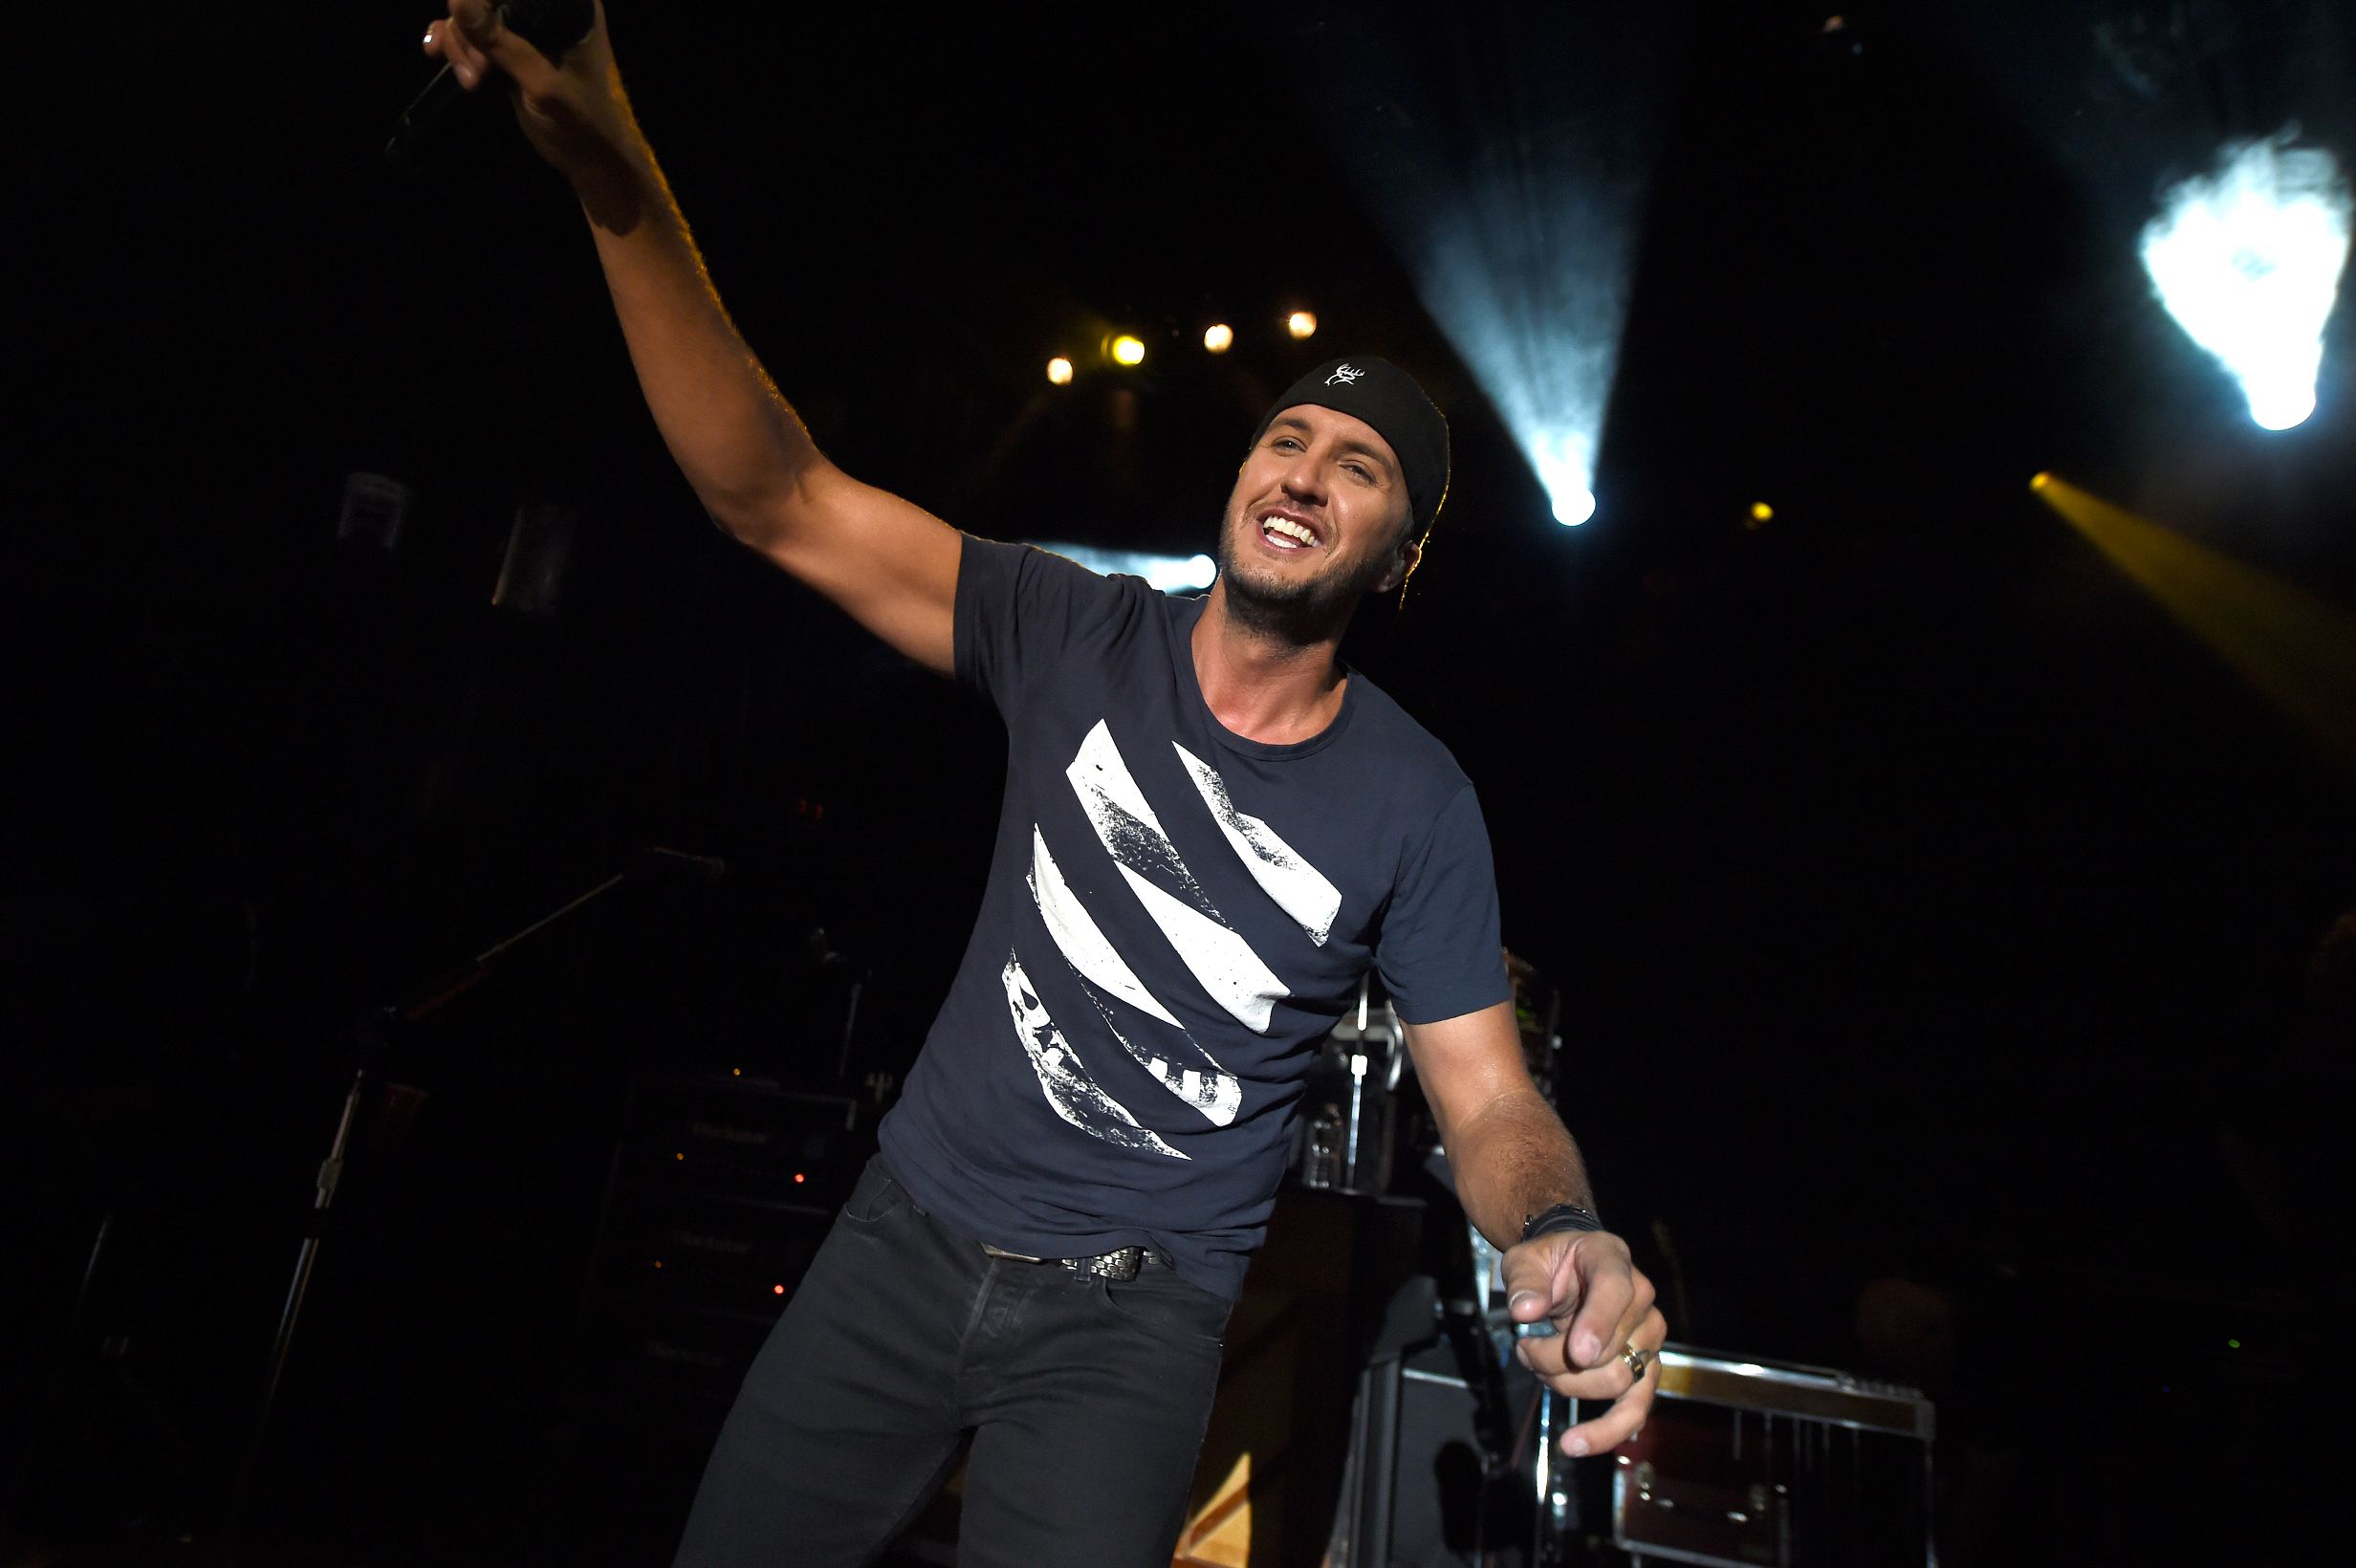 Citi Presents Exclusive Performance by Luke Bryan for Citi Cardmembers to Celebrate The Release of New Album "Kill The Lights"